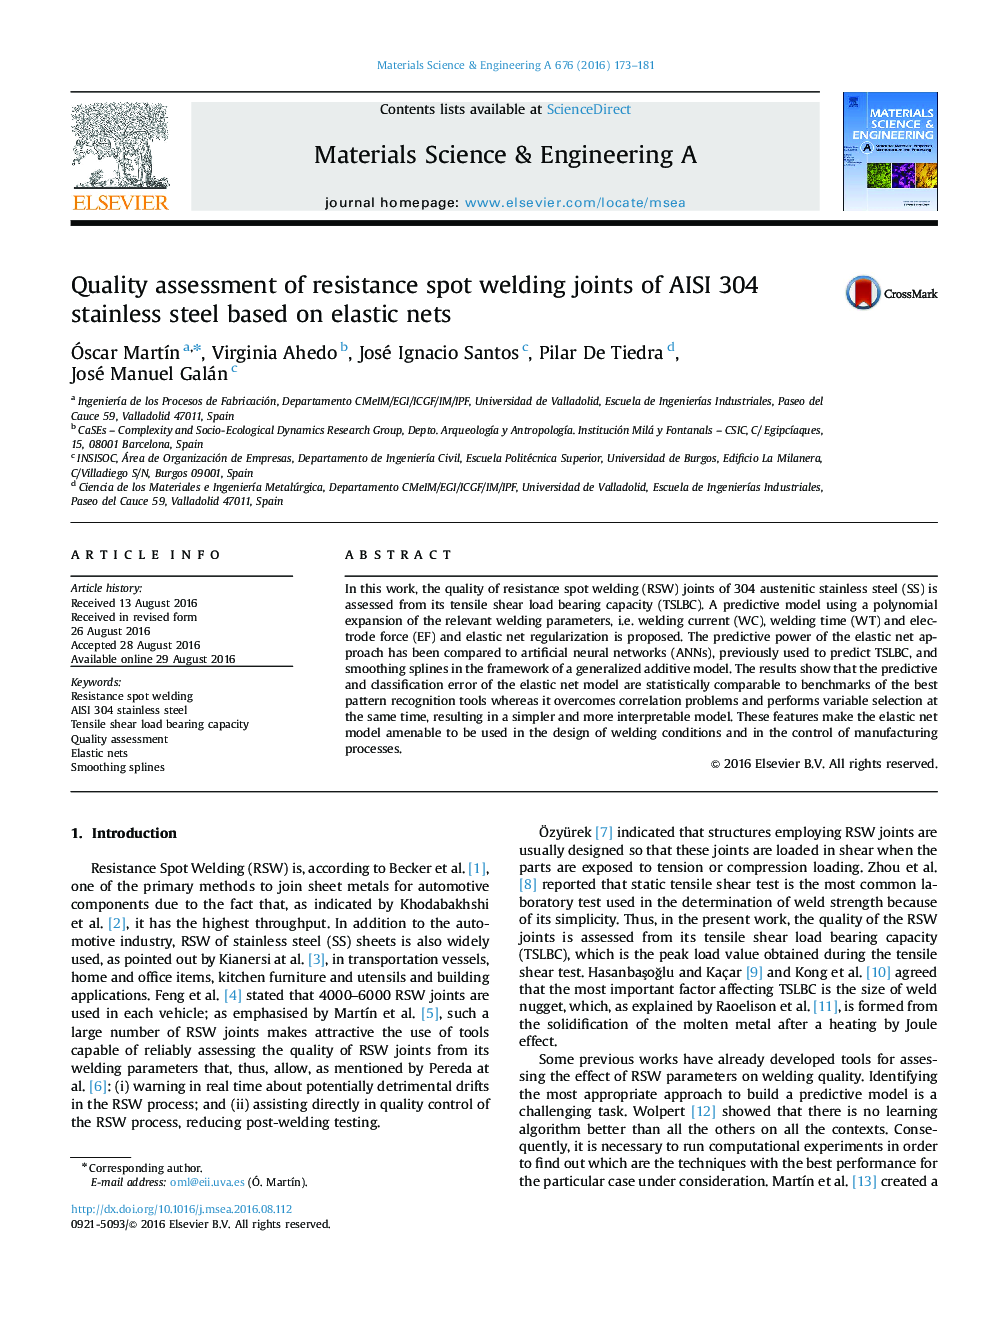 Quality assessment of resistance spot welding joints of AISI 304 stainless steel based on elastic nets